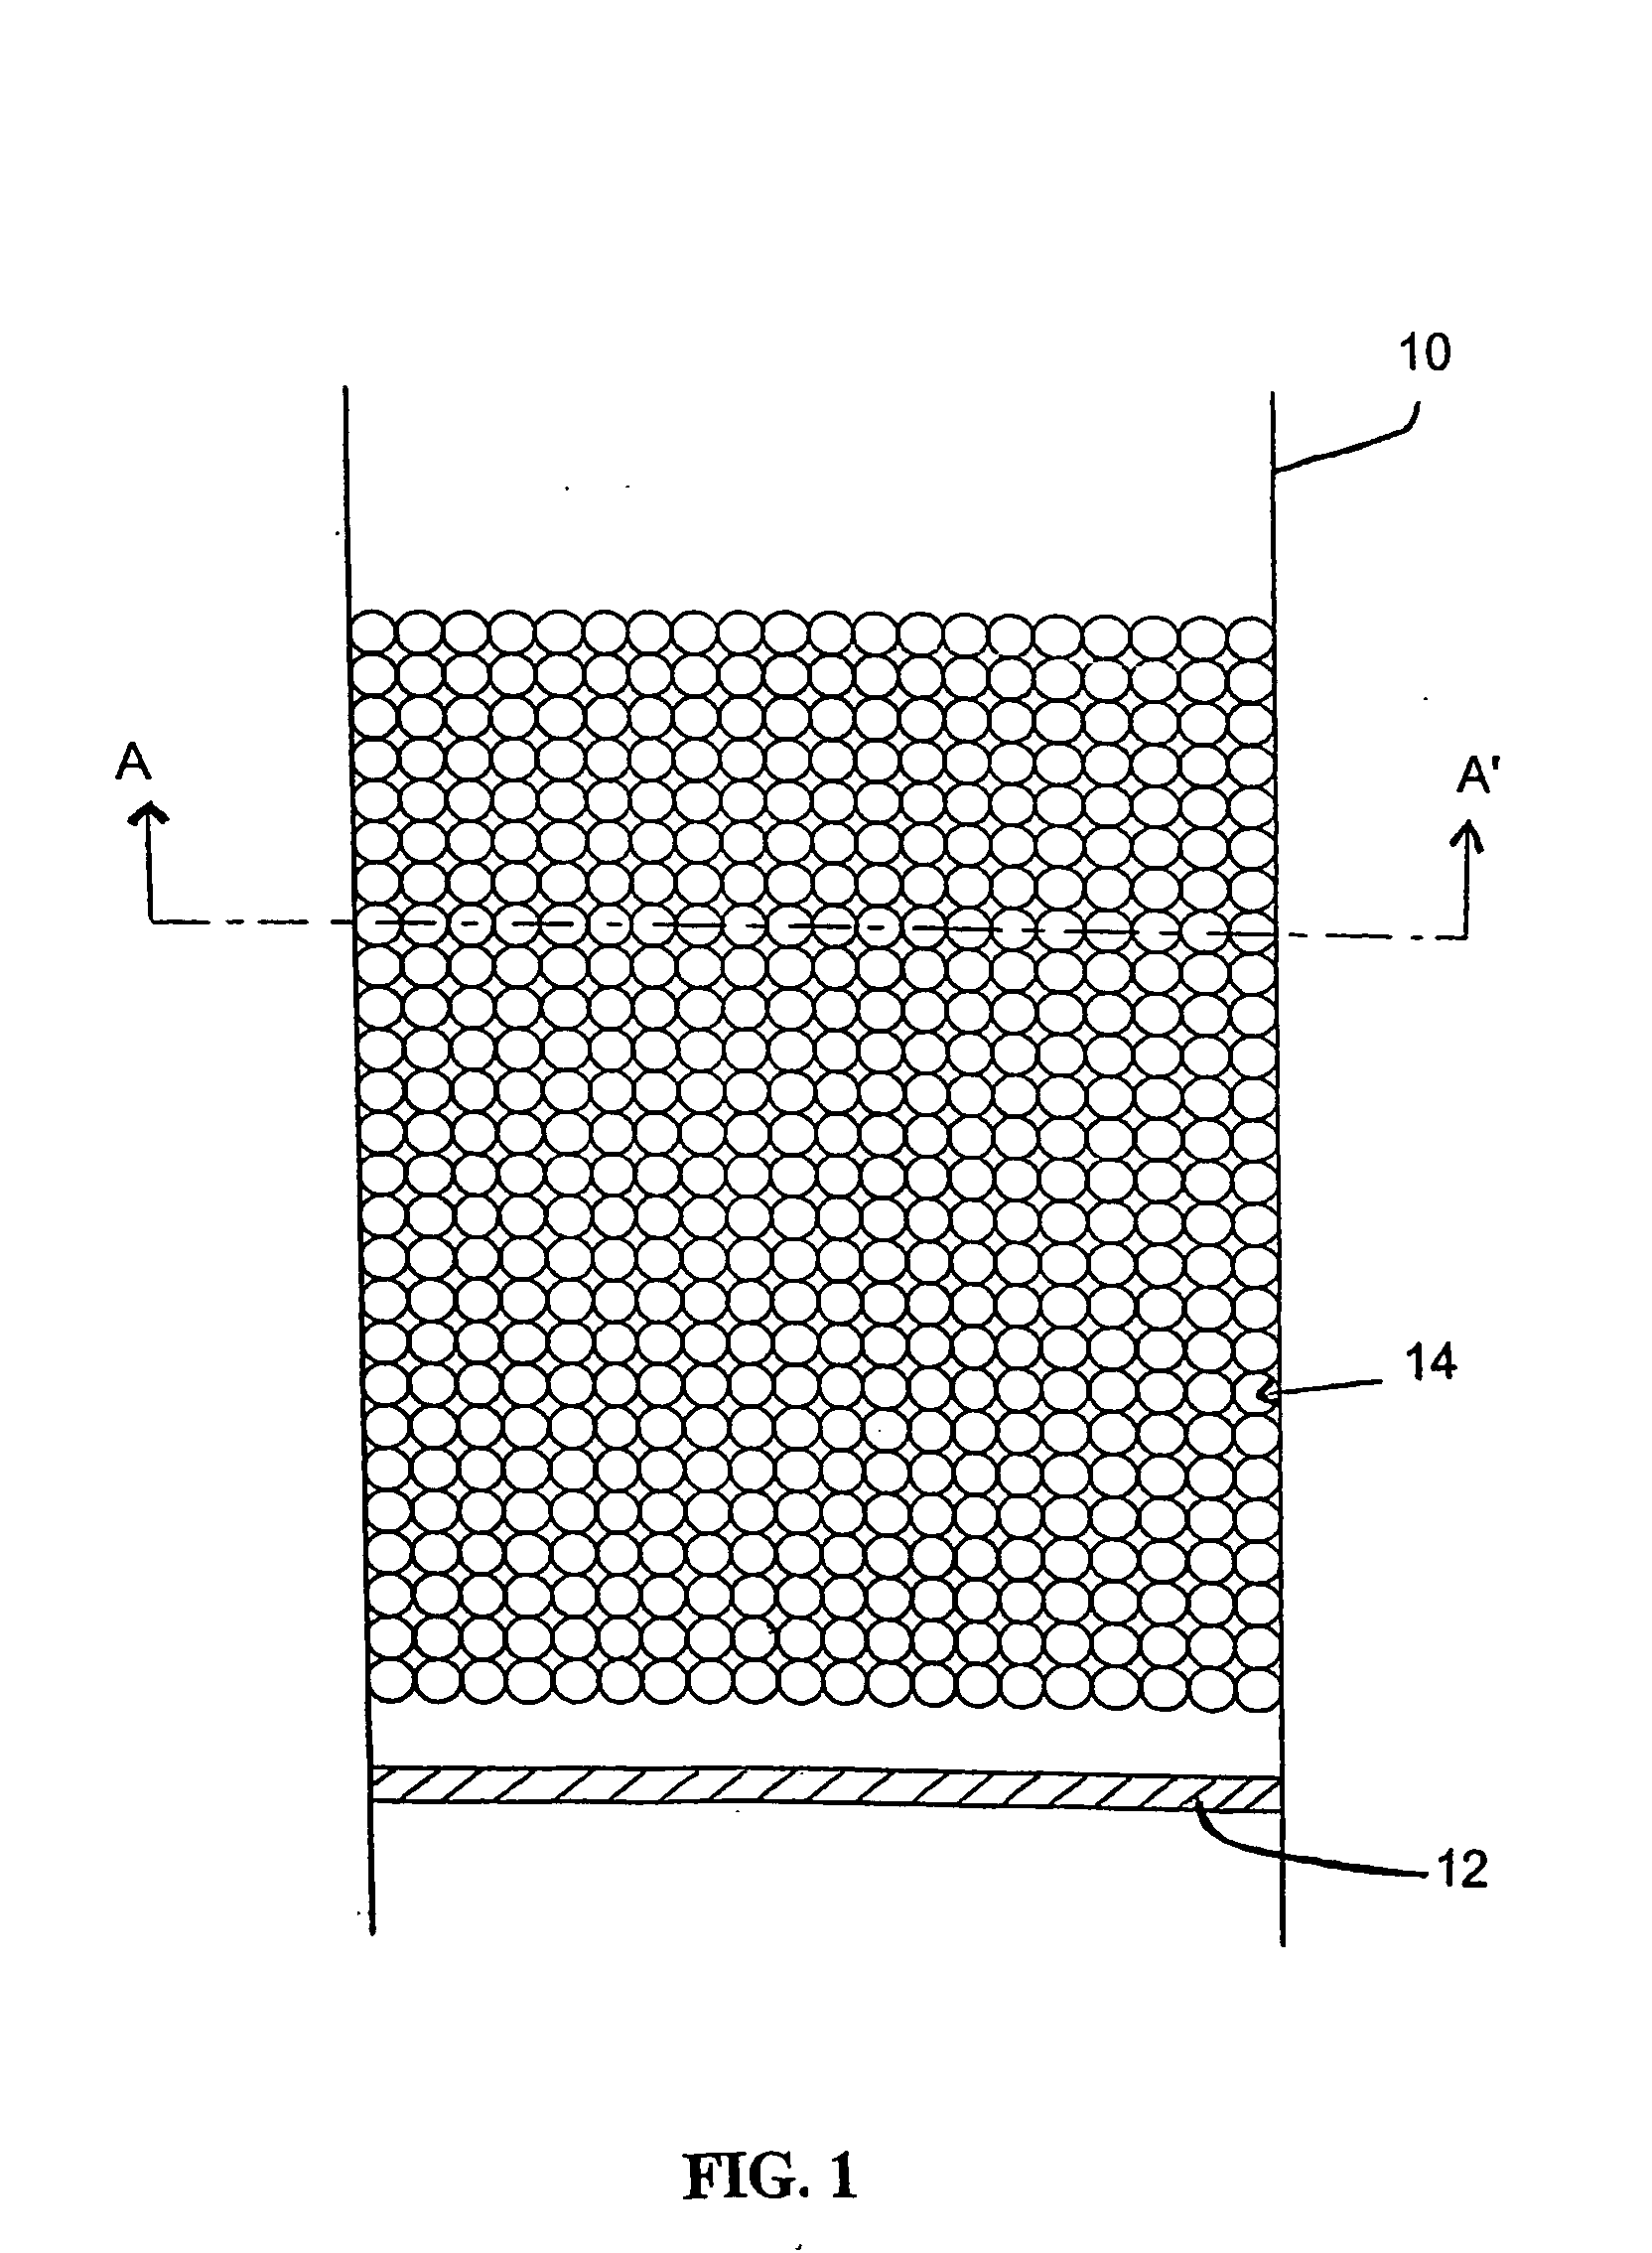 Method for forming matrices of hardened material